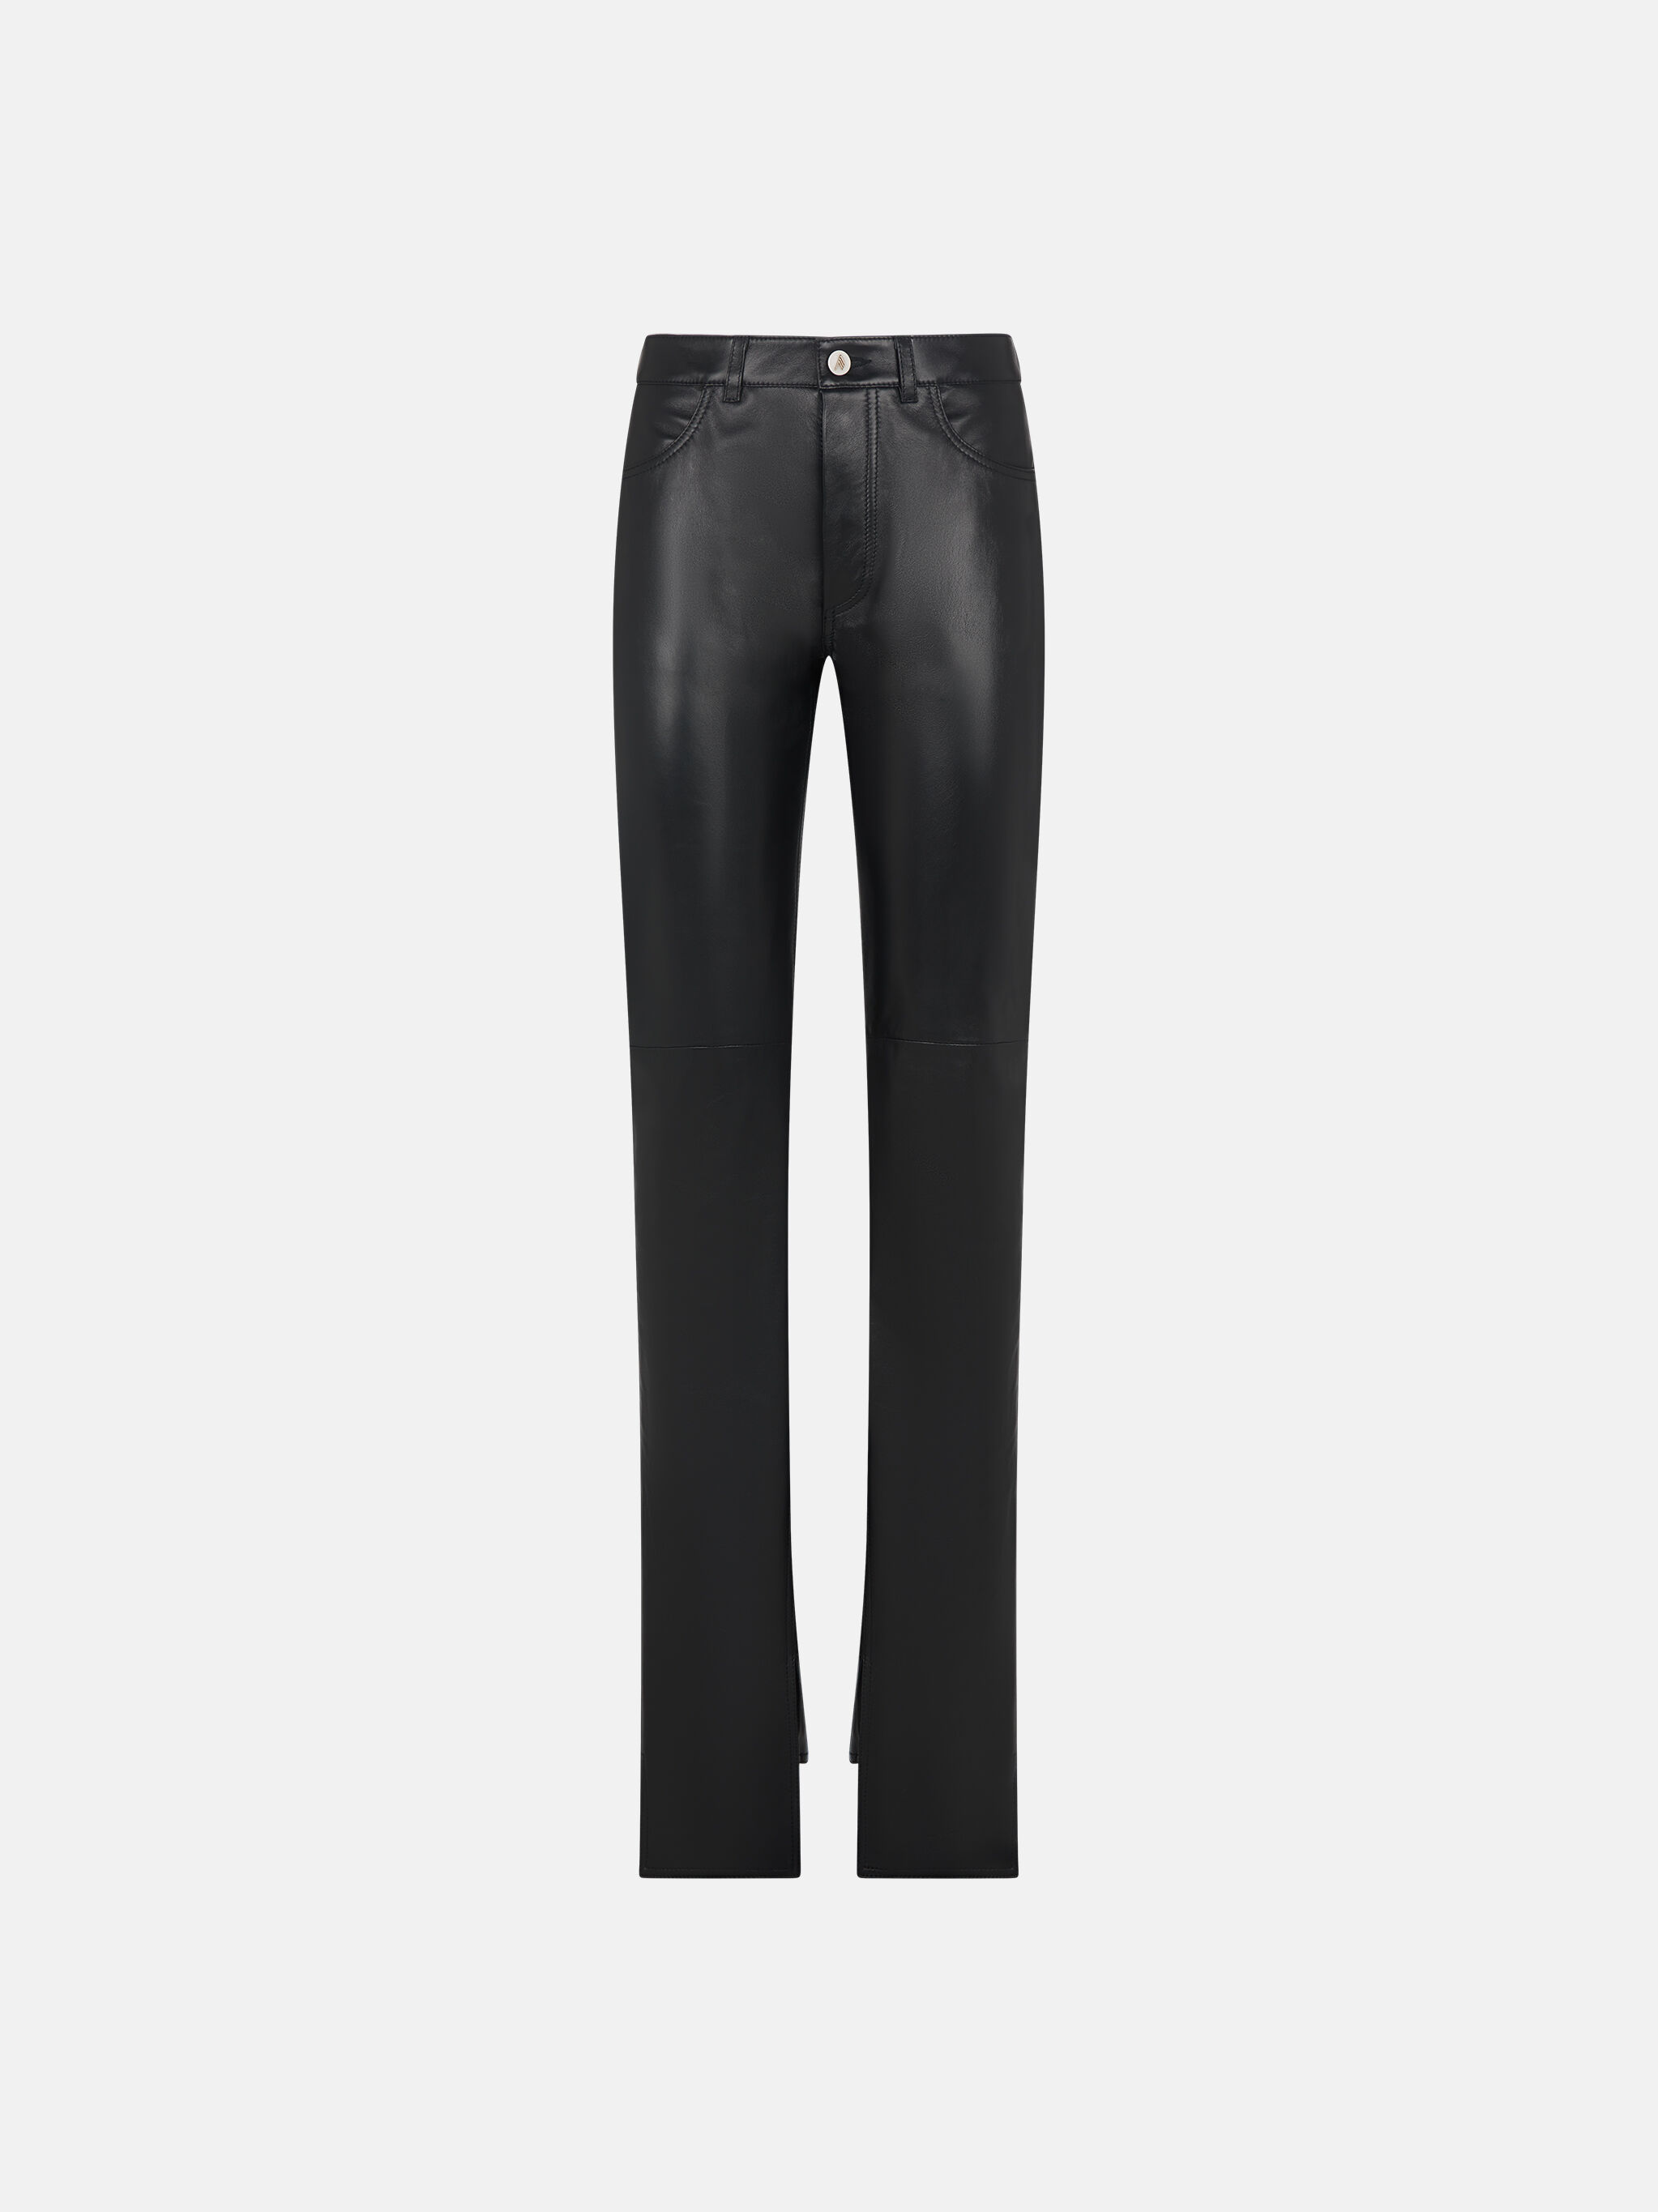 Womens Clothing Trousers Slacks and Chinos Straight-leg trousers The Attico Split Hem Leather Trousers in Black 